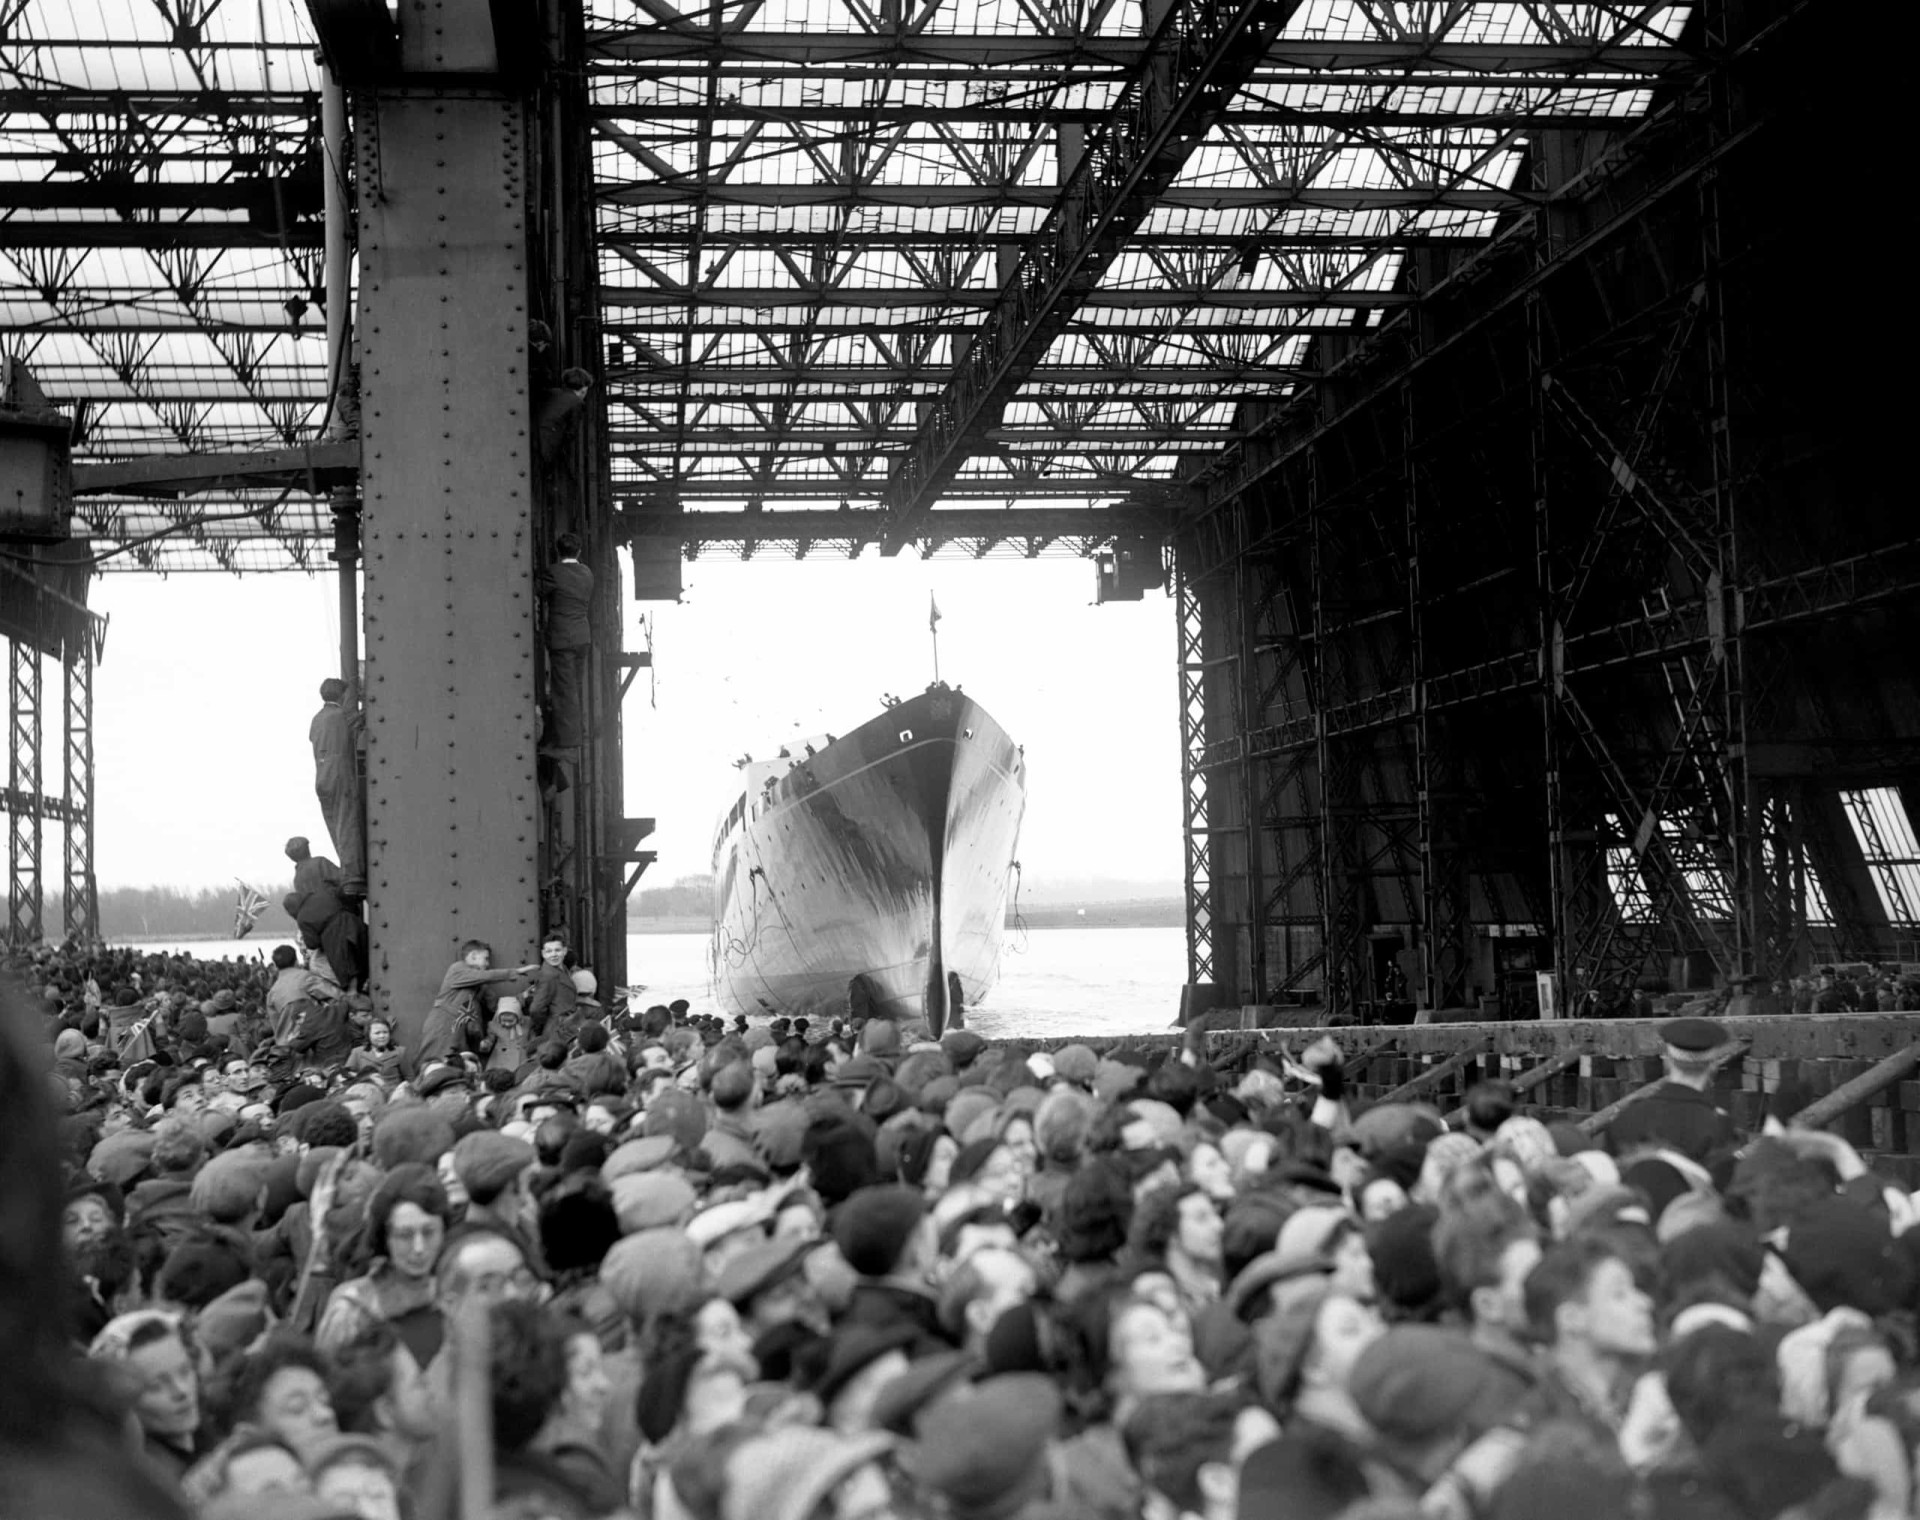 <p>The new Royal Yacht <em>Britannia</em> enters the water after her launch on April 16, 1953 by Queen Elizabeth II at John Brown's shipyard on Clydebank, Scotland. The 126-m (413-ft) <em>Britannia</em> was designed with three masts and could reach a seagoing cruising speed of 21 knots.</p><p>You may also like:<a href="https://www.starsinsider.com/n/179932?utm_source=msn.com&utm_medium=display&utm_campaign=referral_description&utm_content=474709v3en-us"> Do you recognize these big TV stars from 10 years ago?</a></p>